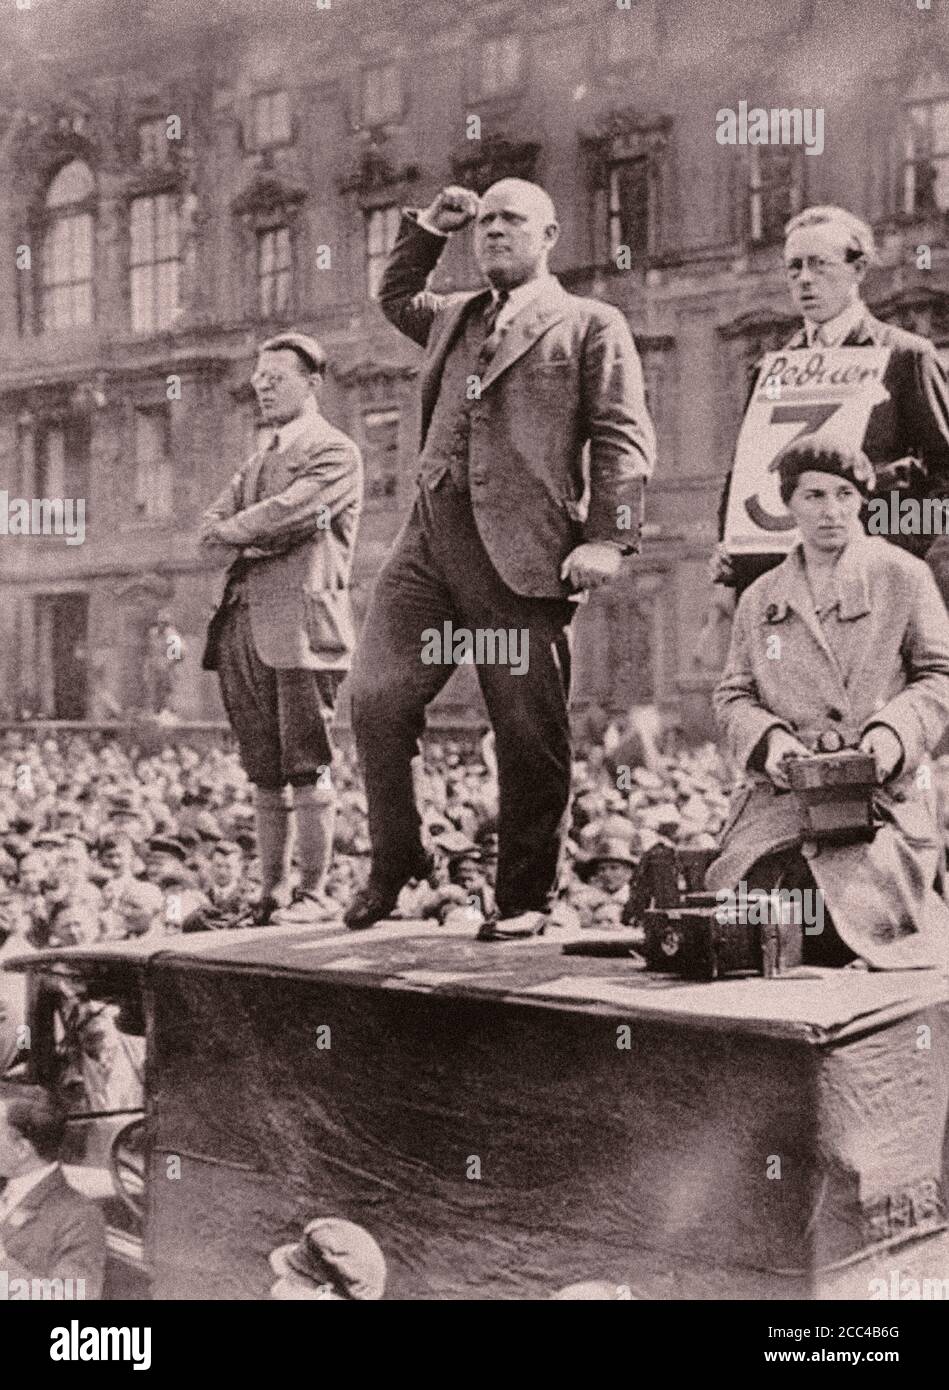 Ernst Thälmann (1886 – 1944) was a German communist politician, and leader of the Communist Party of Germany (KPD) from 1925 to 1933. A committed Stal Stock Photo